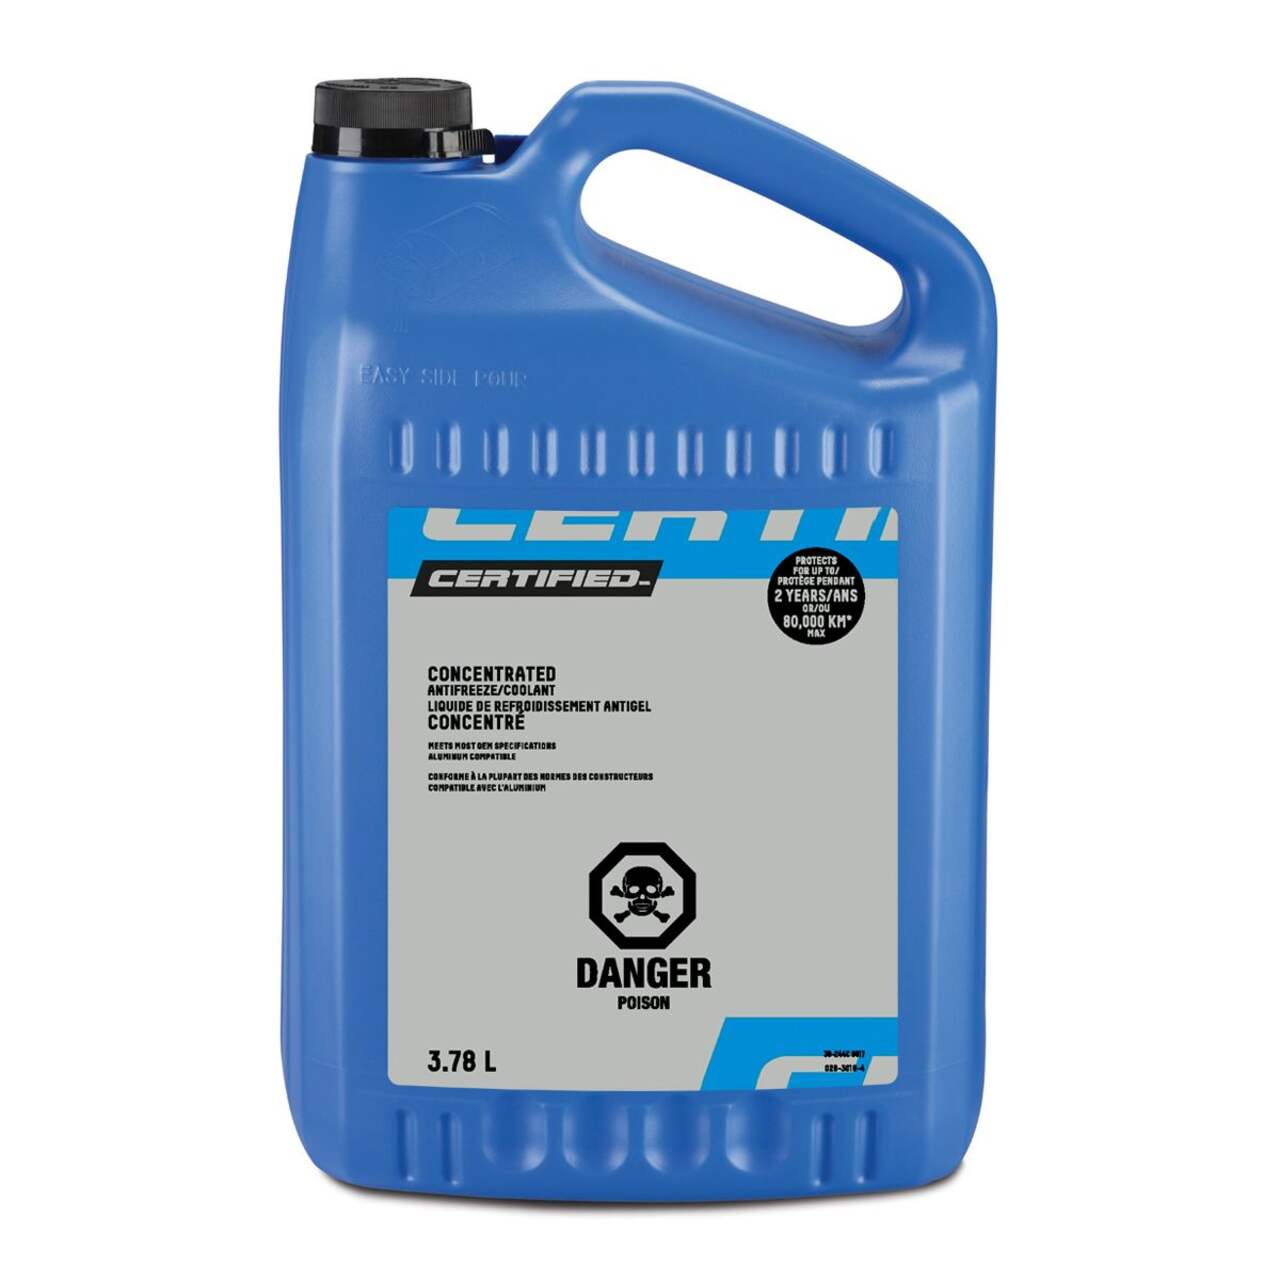 https://media-www.canadiantire.ca/product/automotive/auto-maintenance/auto-fluids/0293019/certified-coolant-3-78l-a17df537-cb87-479a-9773-9b21fcff3744-jpgrendition.jpg?imdensity=1&imwidth=1244&impolicy=mZoom